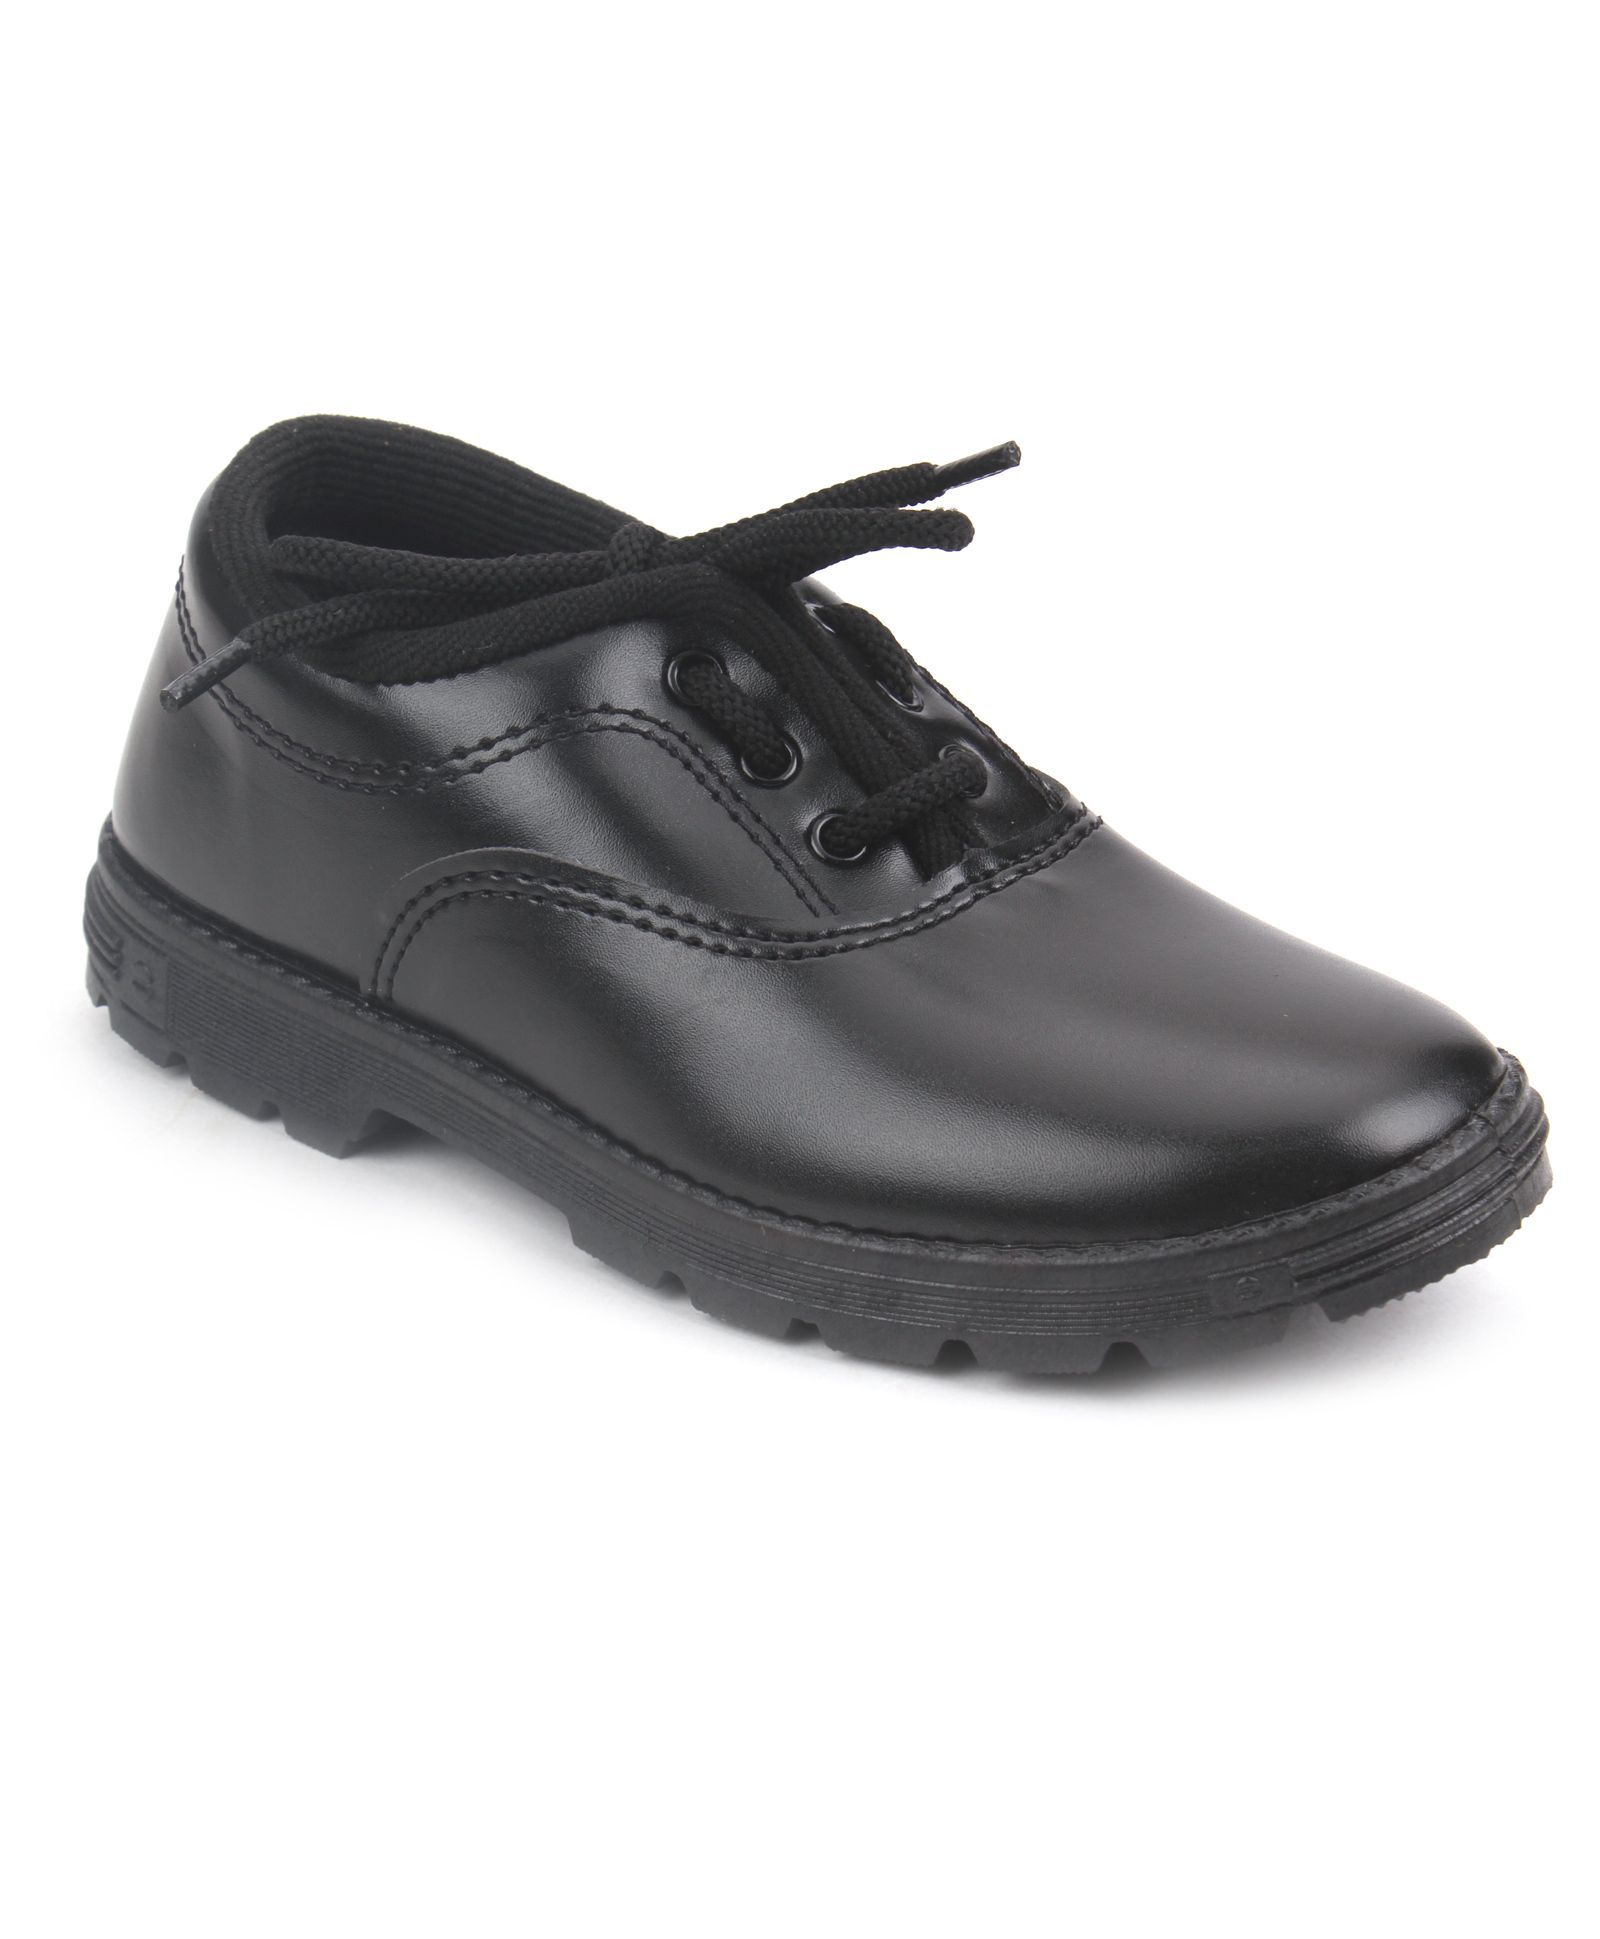 Liberty School Shoes With Tie Up Style 